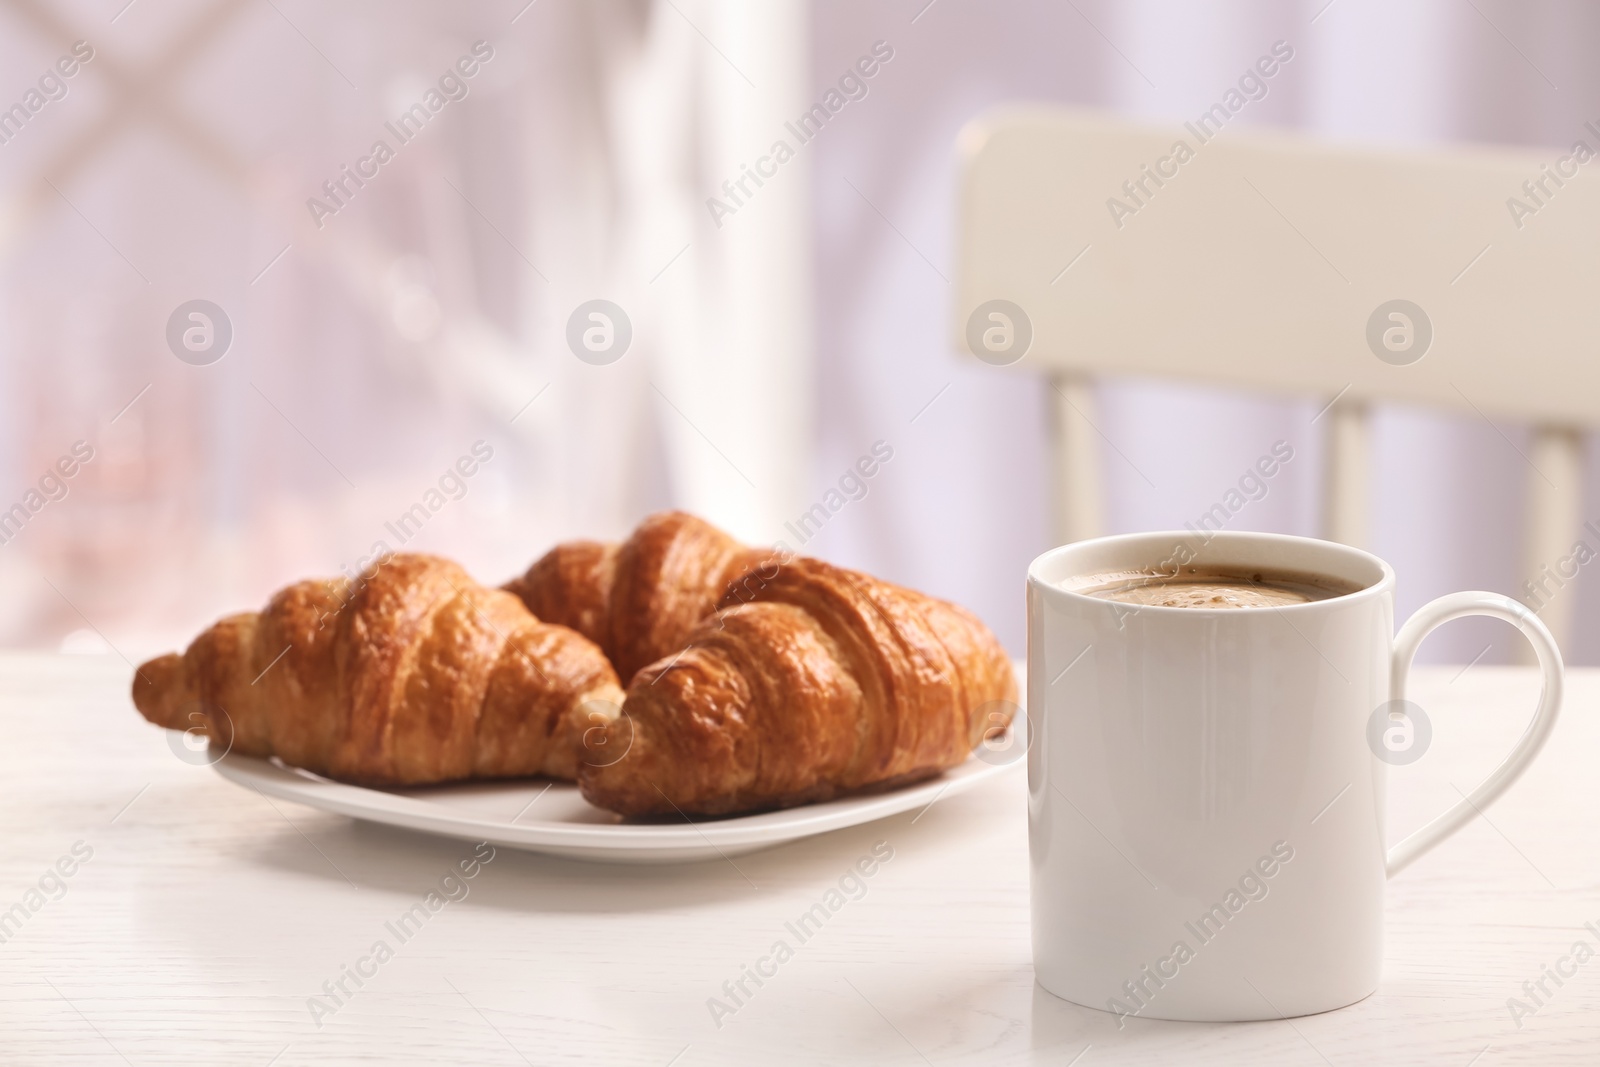 Photo of Cup of coffee and plate with croissants on table. Space for text